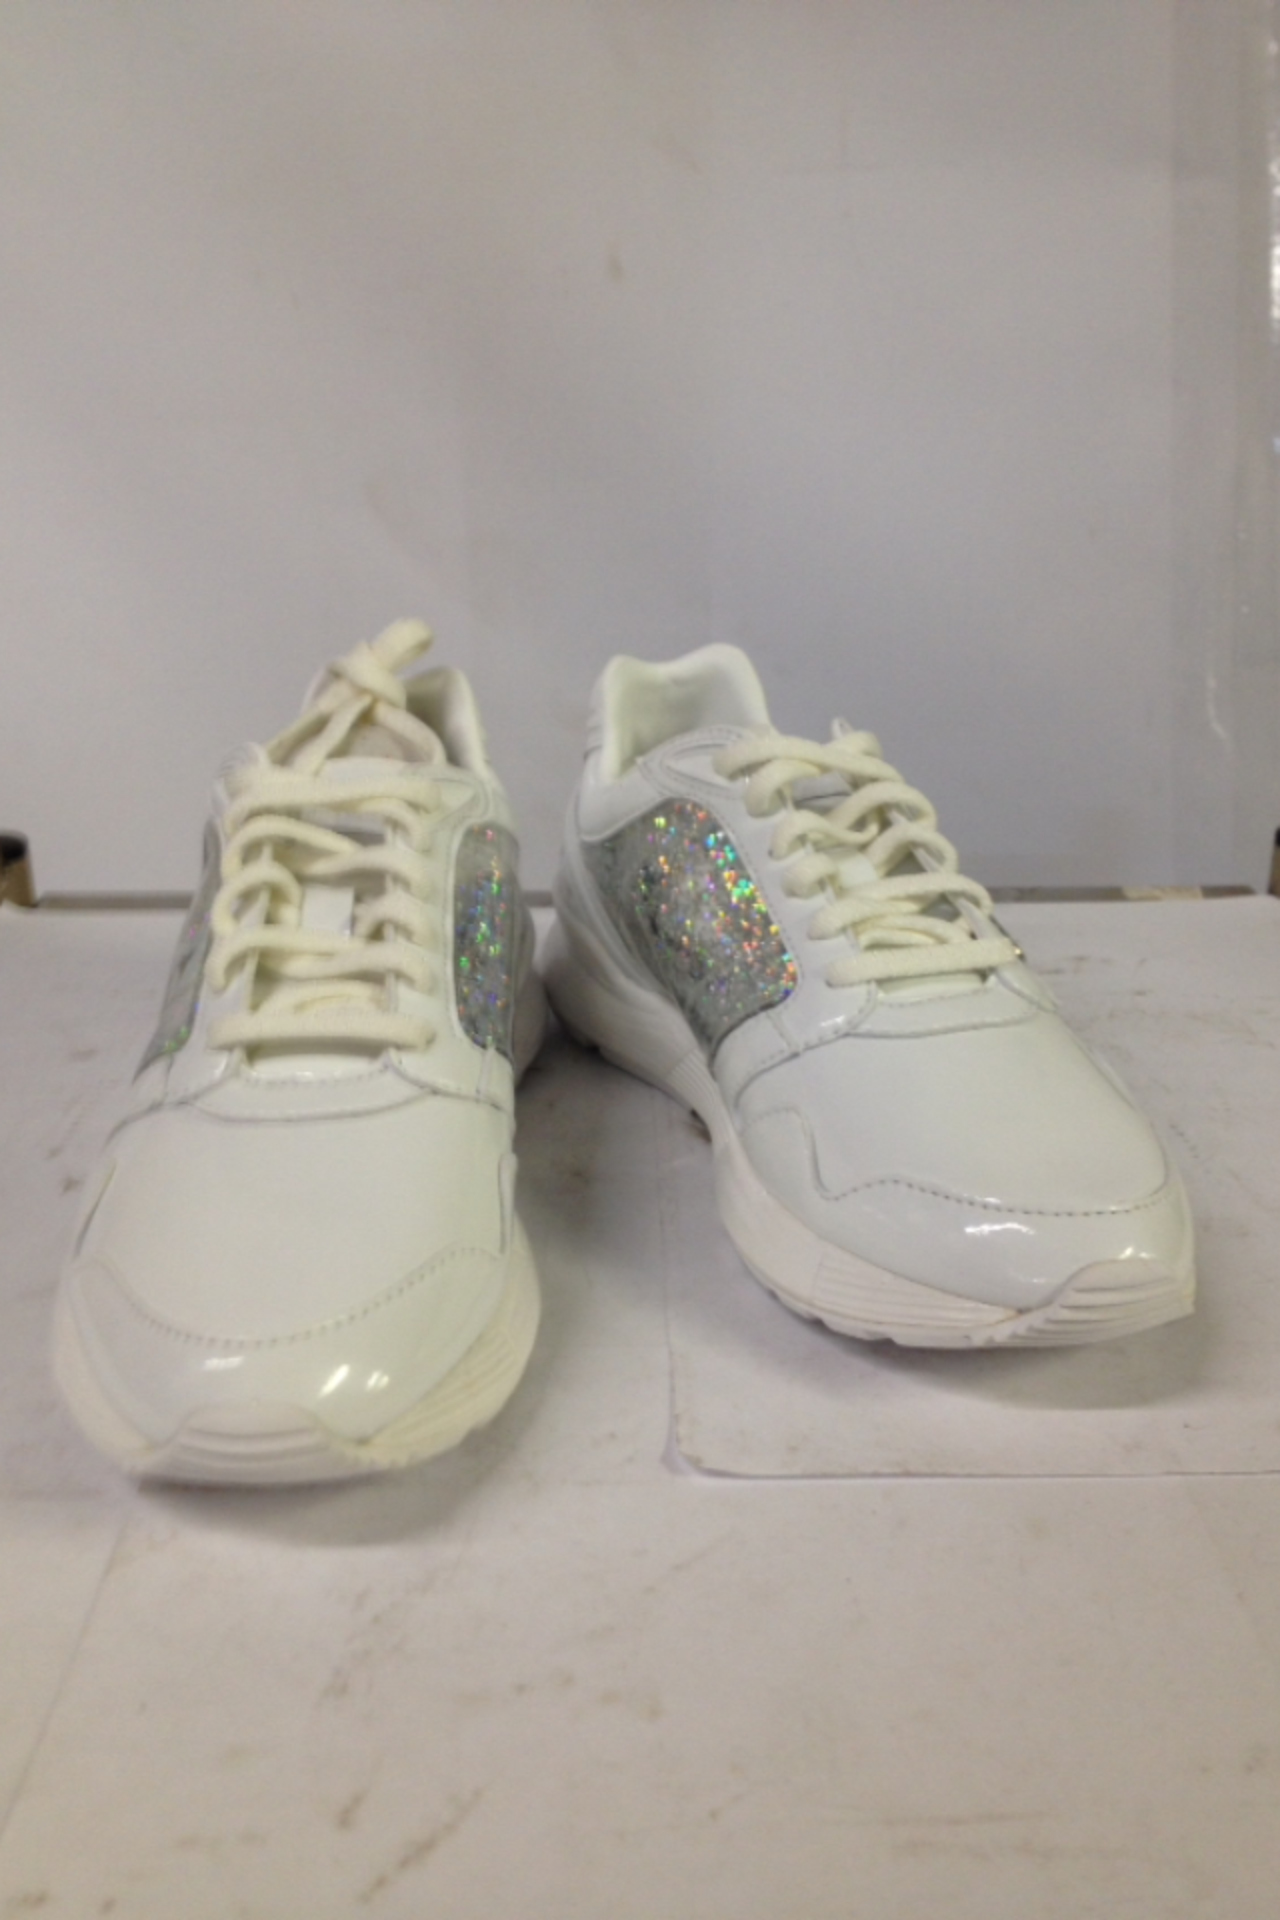 1 x Le Coq Sportif Trainers | Omega x W Snowflakes | Colour: Optical White | UK Size: 5 | RRP £ 124 - Image 2 of 2